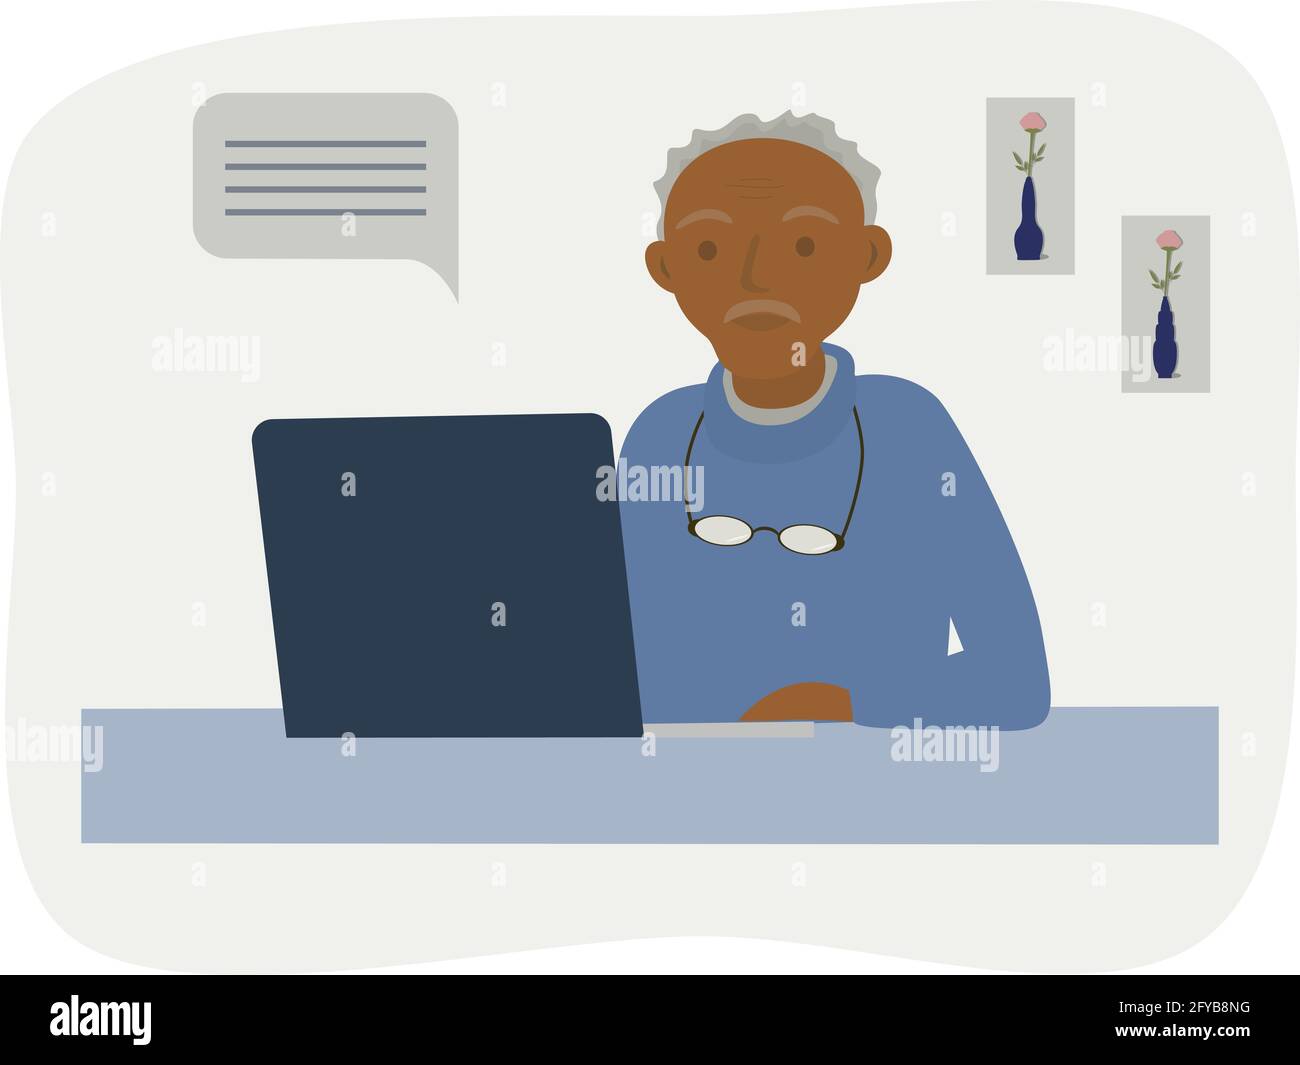 Elderly freelancer using laptop. Freelance work for everyone concept. Old man working or studying at home. Online communication. Isolated vector illus Stock Vector